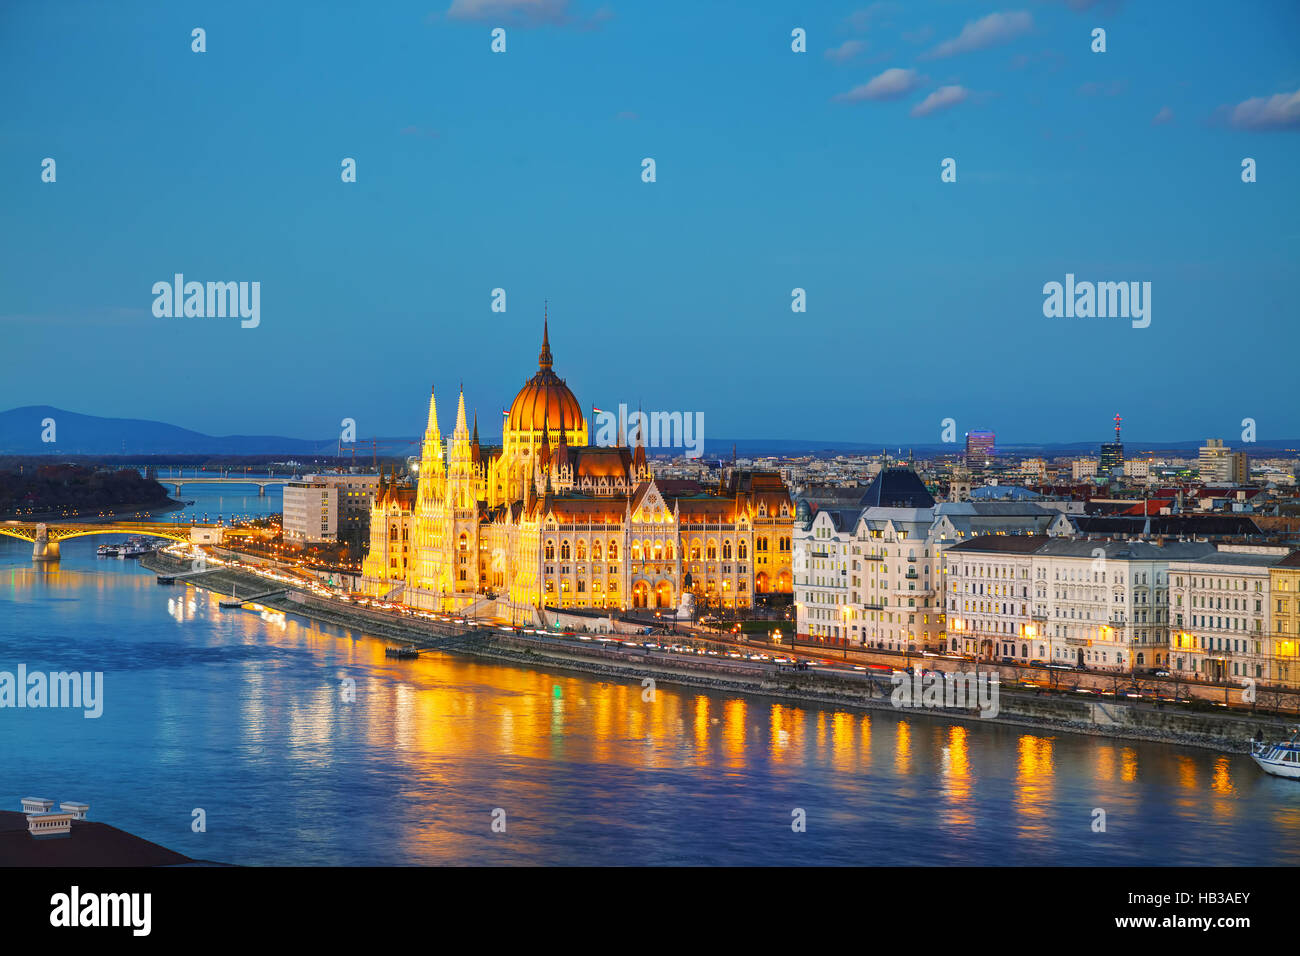 Parliament building in Budapest, Hungary Stock Photo